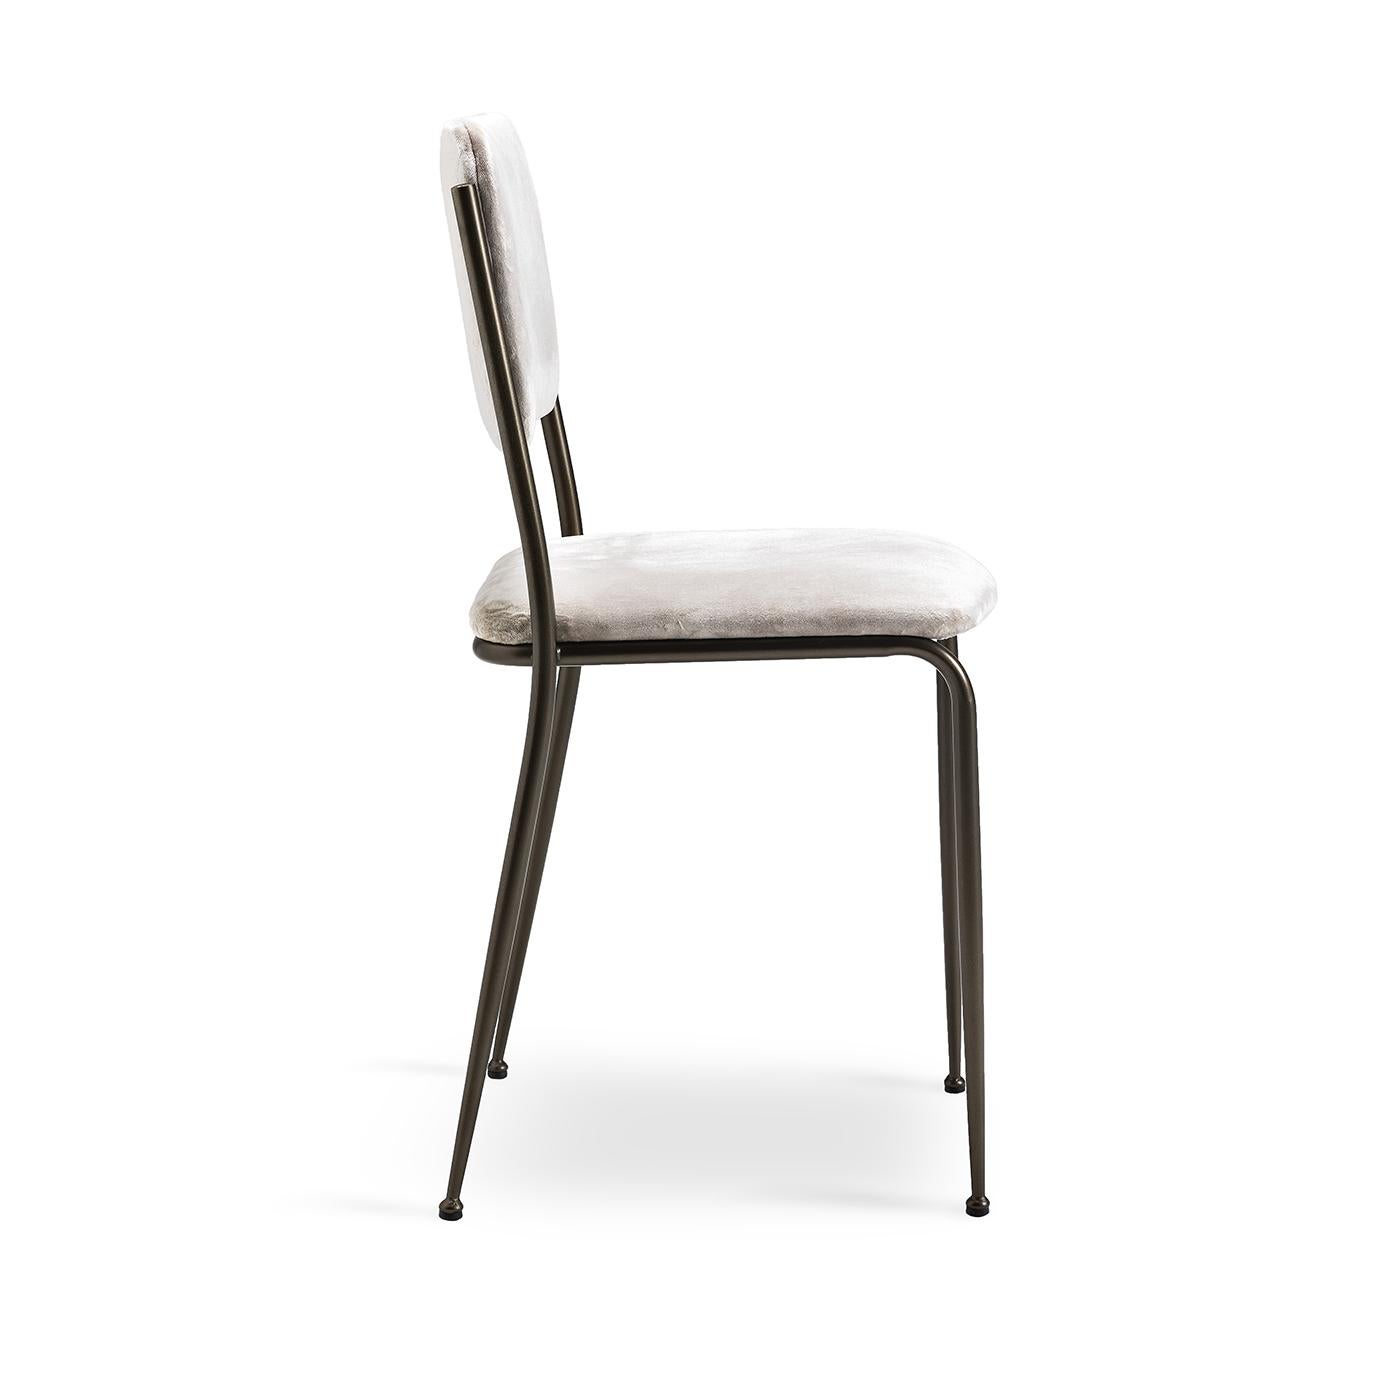 This lovely little dining chair with a bit of vintage spark has a simple metal frame and legs that are painted in a brushed matte bronze finish. The seat and back are both upholstered in white velvet, and comfort is guaranteed with seat and back